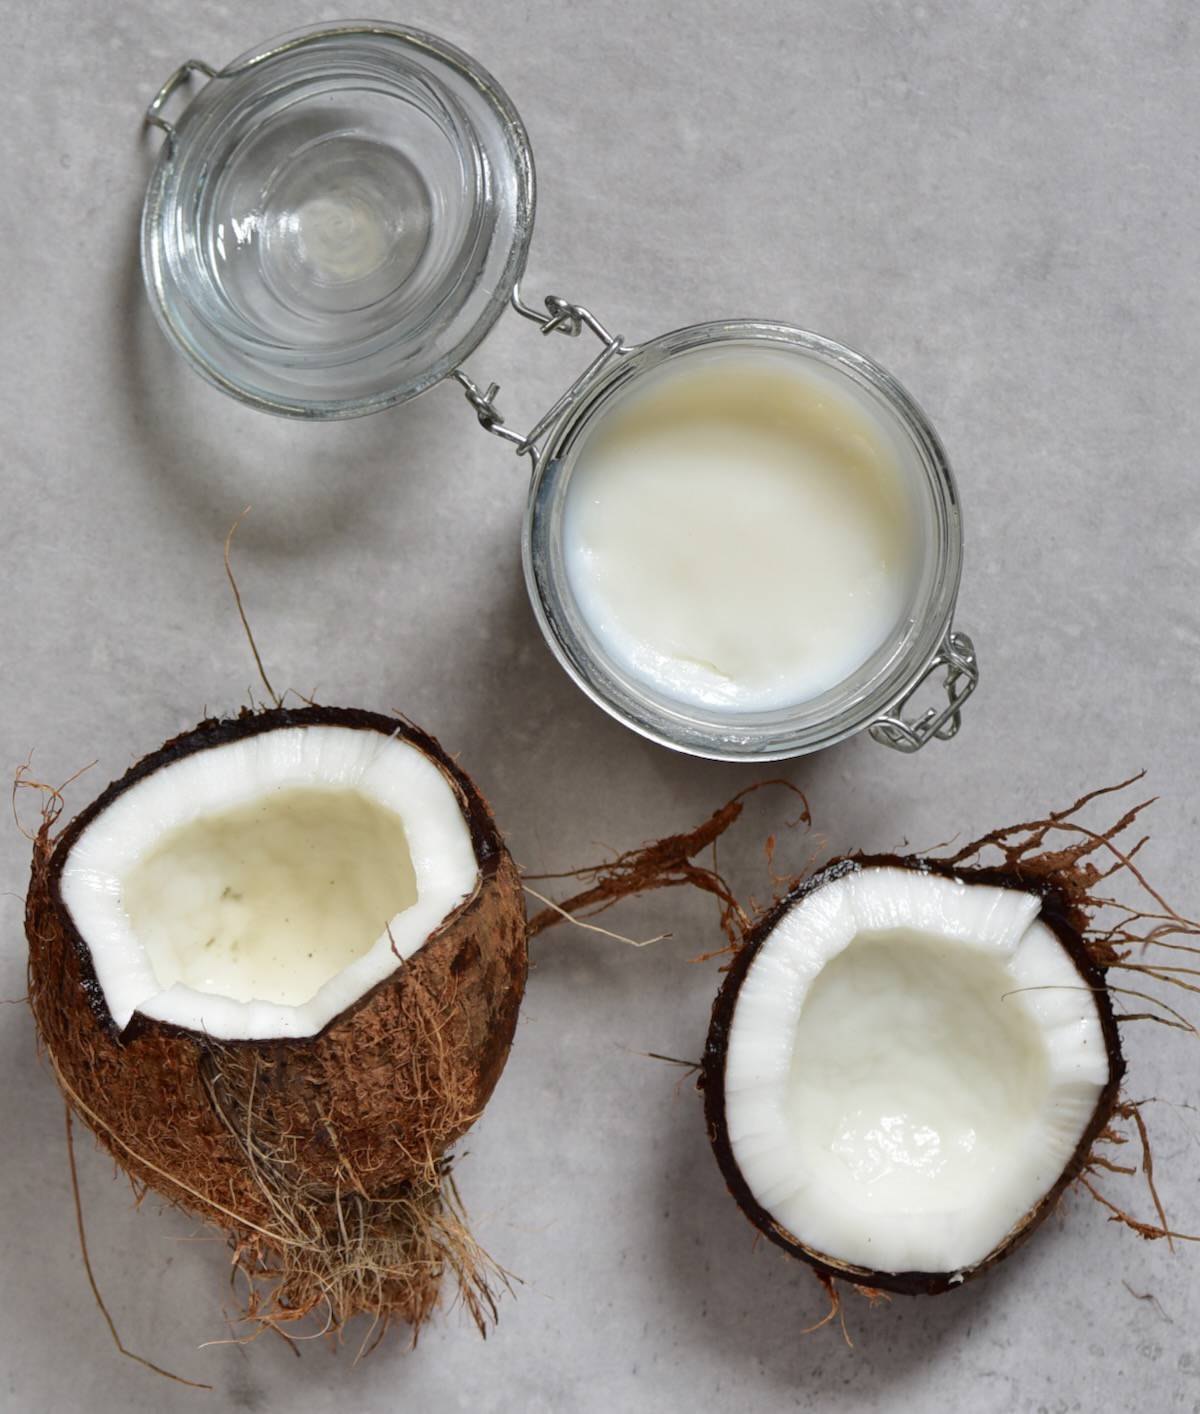 Homemade coconut oil in a small jar and an opened coconut next to it